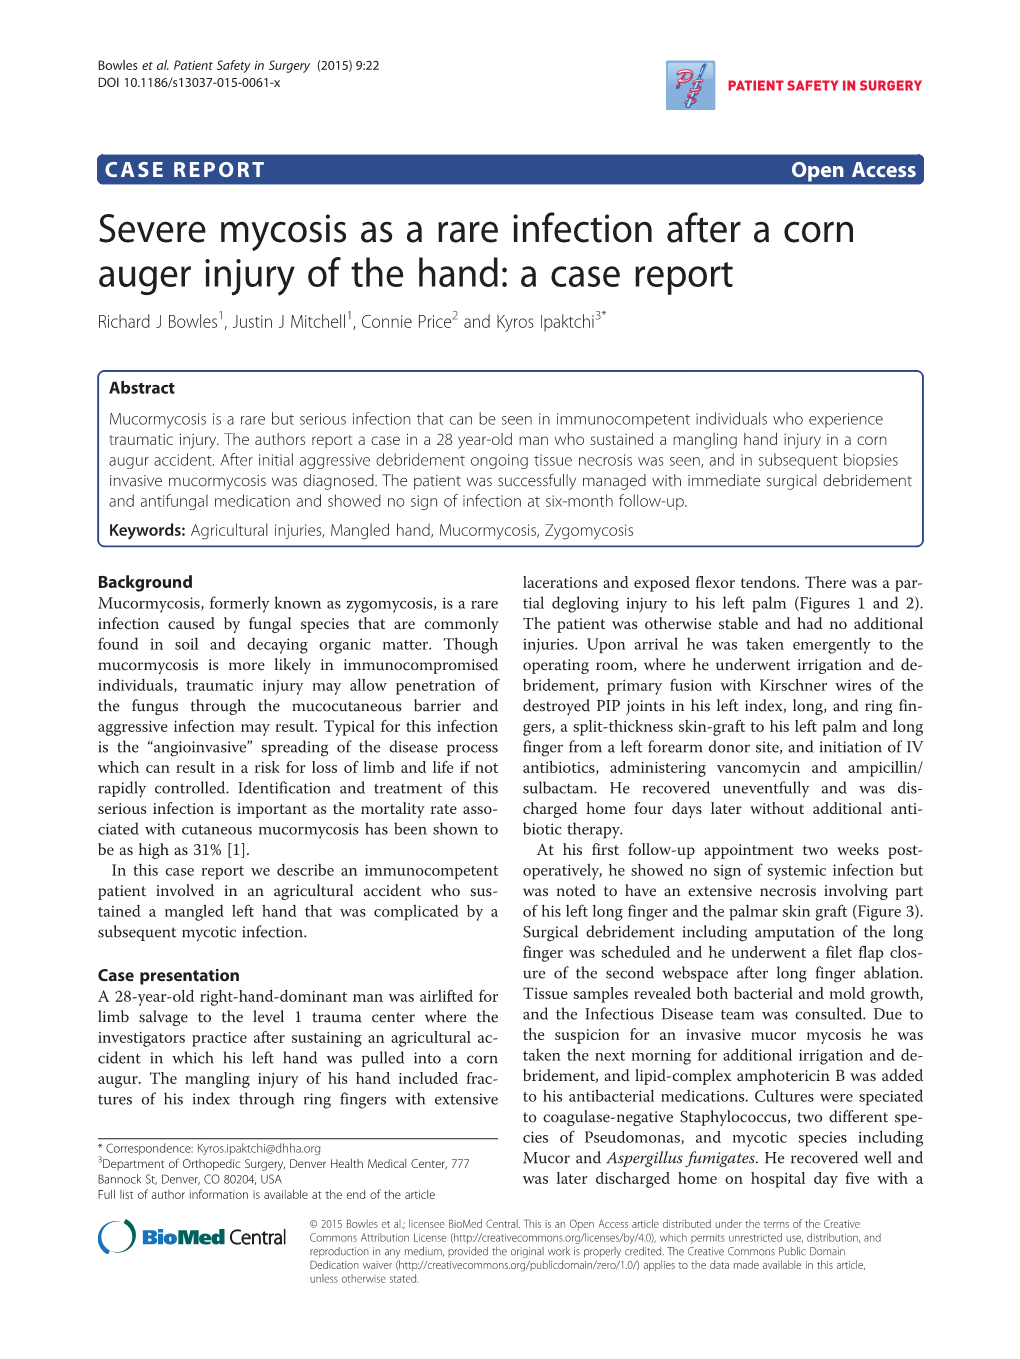 Severe Mycosis As a Rare Infection After a Corn Auger Injury of the Hand: a Case Report Richard J Bowles1, Justin J Mitchell1, Connie Price2 and Kyros Ipaktchi3*